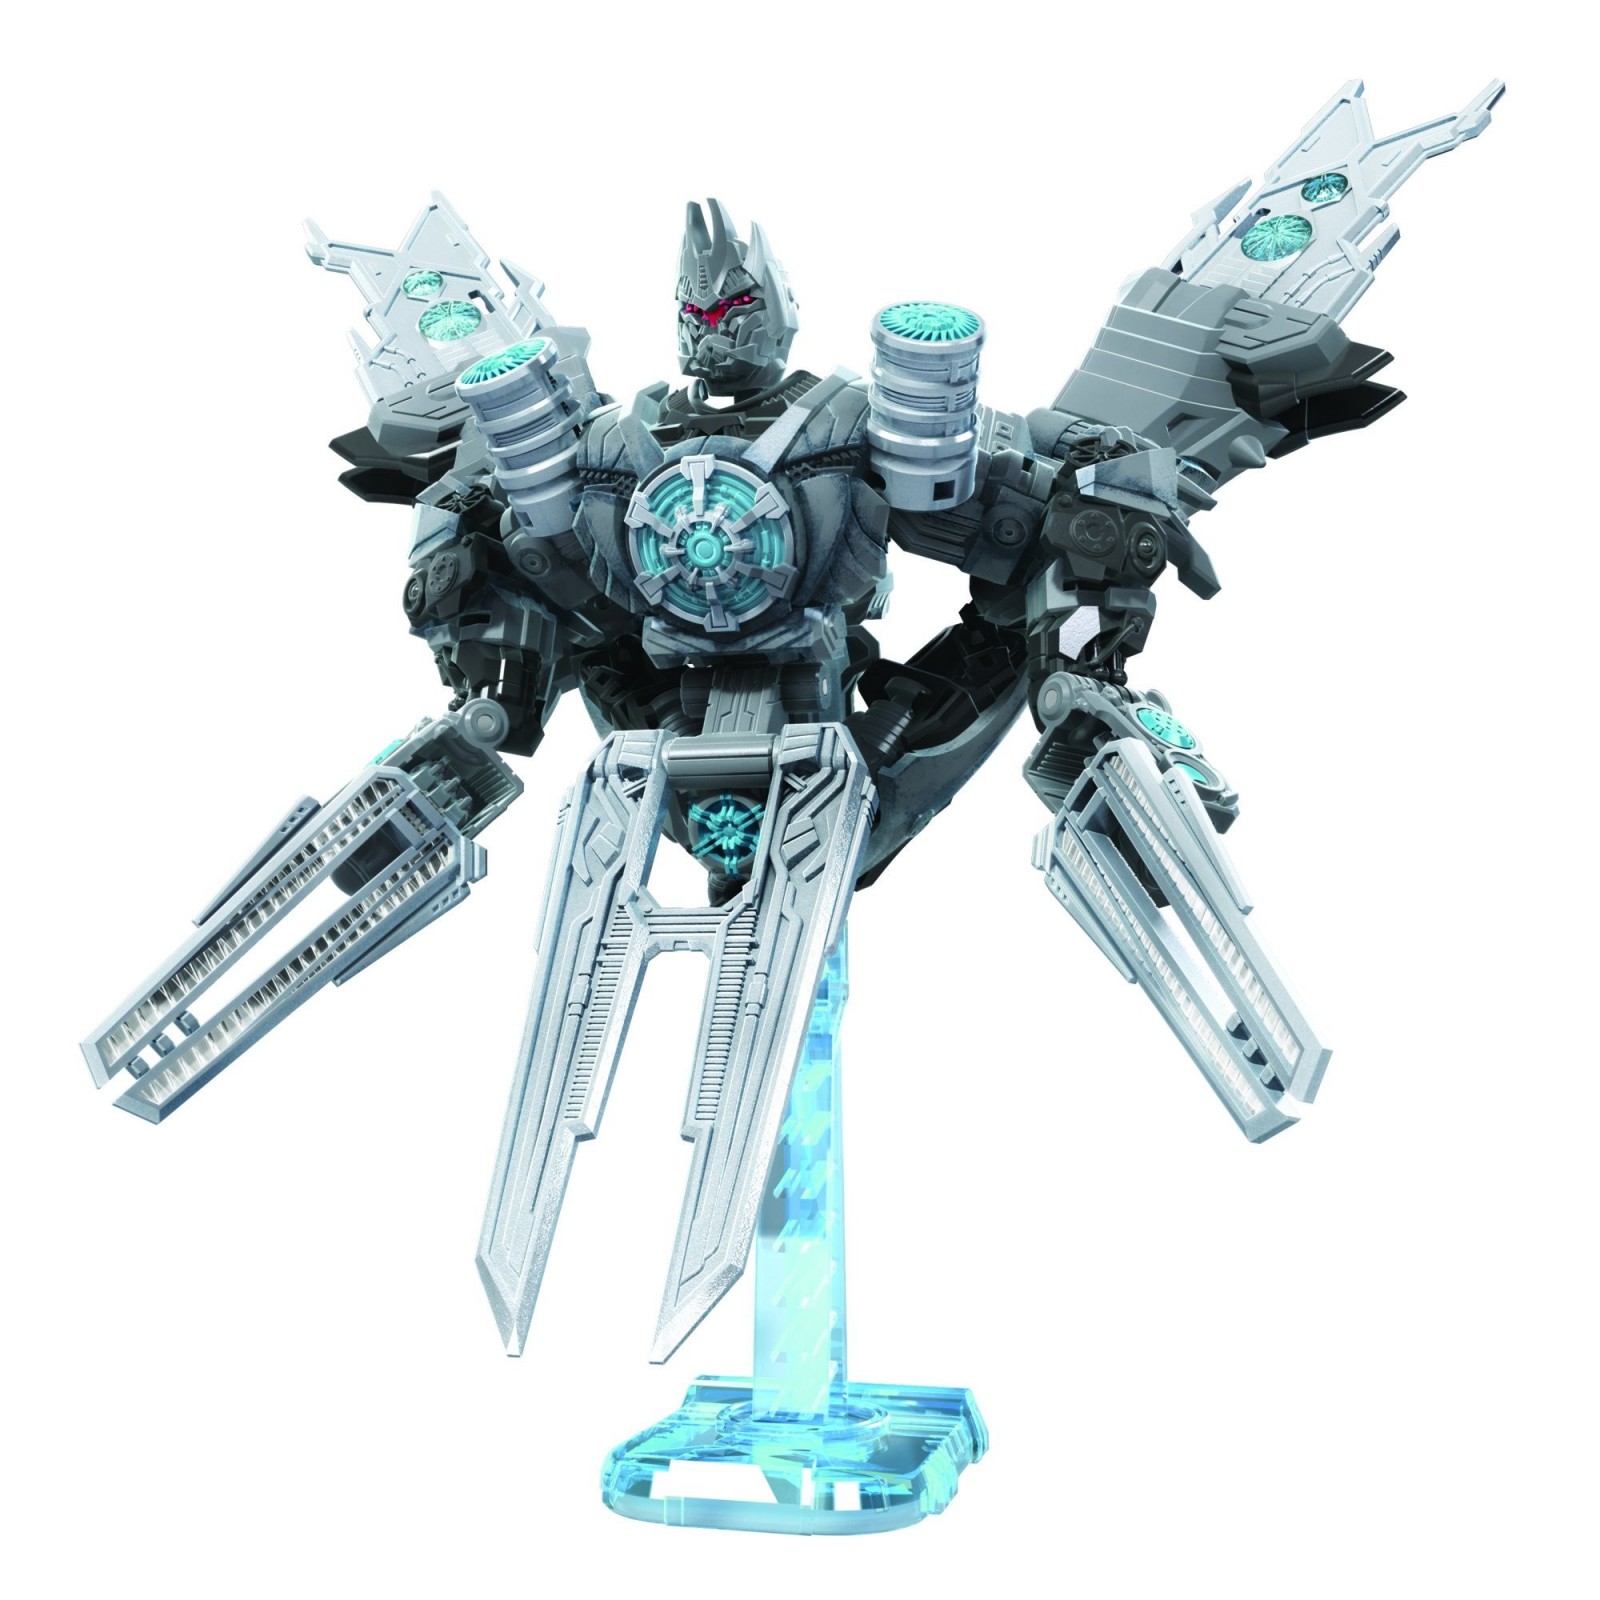 Transformers News: Transformers Studio Series Official Images - Sentinel Prime, Topspin, Skipjack, Blitzwing, and More